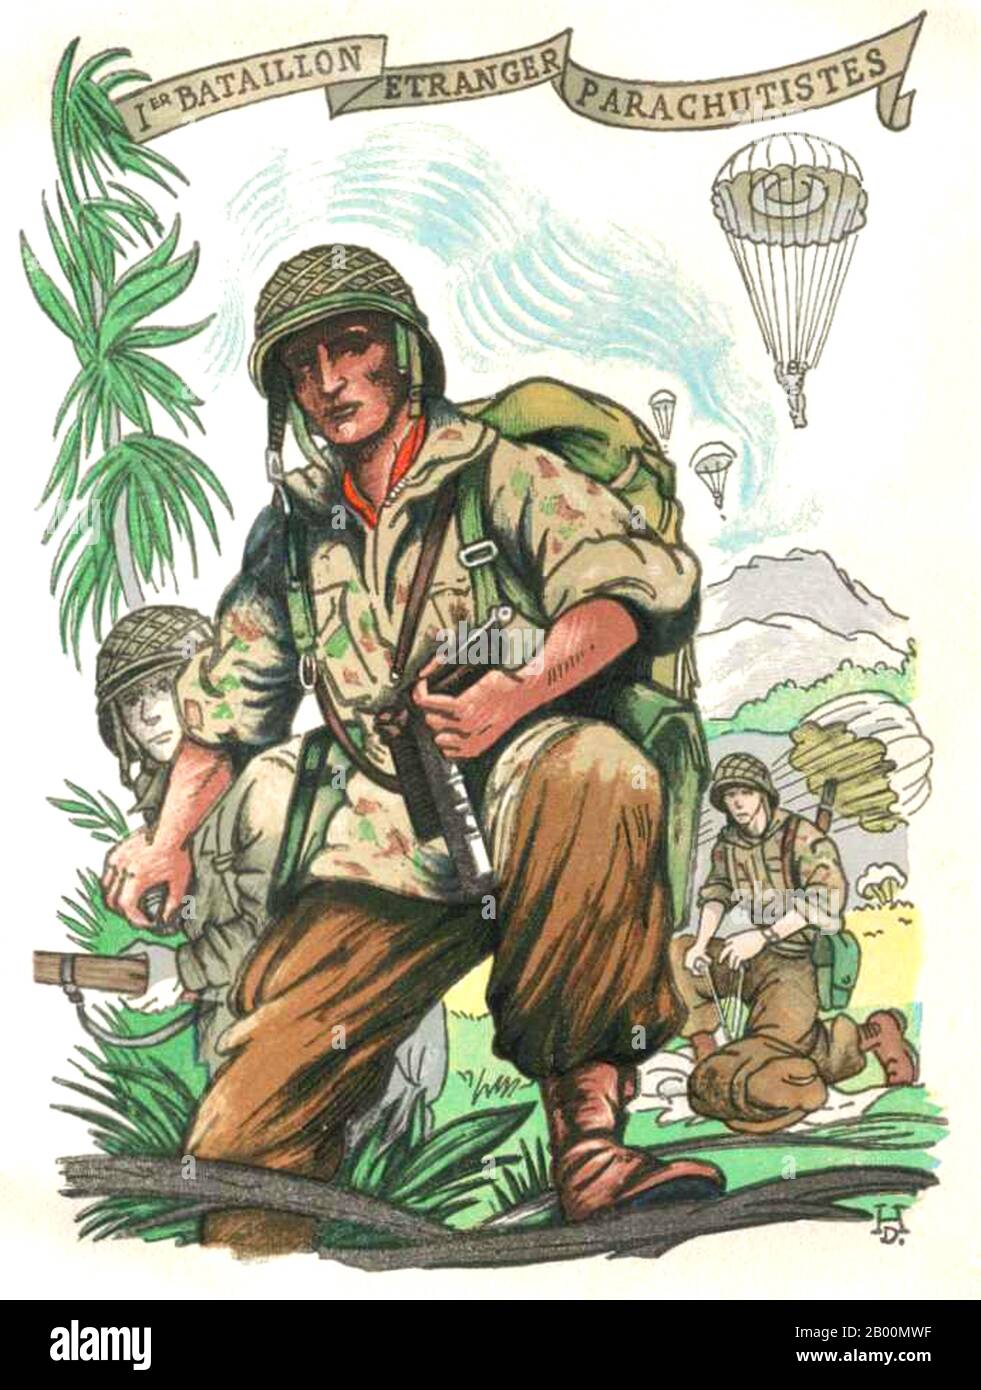 Vietnam: Foreign Legion poster showing soldiers of the 1st Parachute Battalion.  The French Foreign Legion (French: Légion étrangère) is a unique military unit in the French Army established in 1831. The legion was specifically created for foreign nationals wishing to serve in the French Armed Forces. Stock Photo